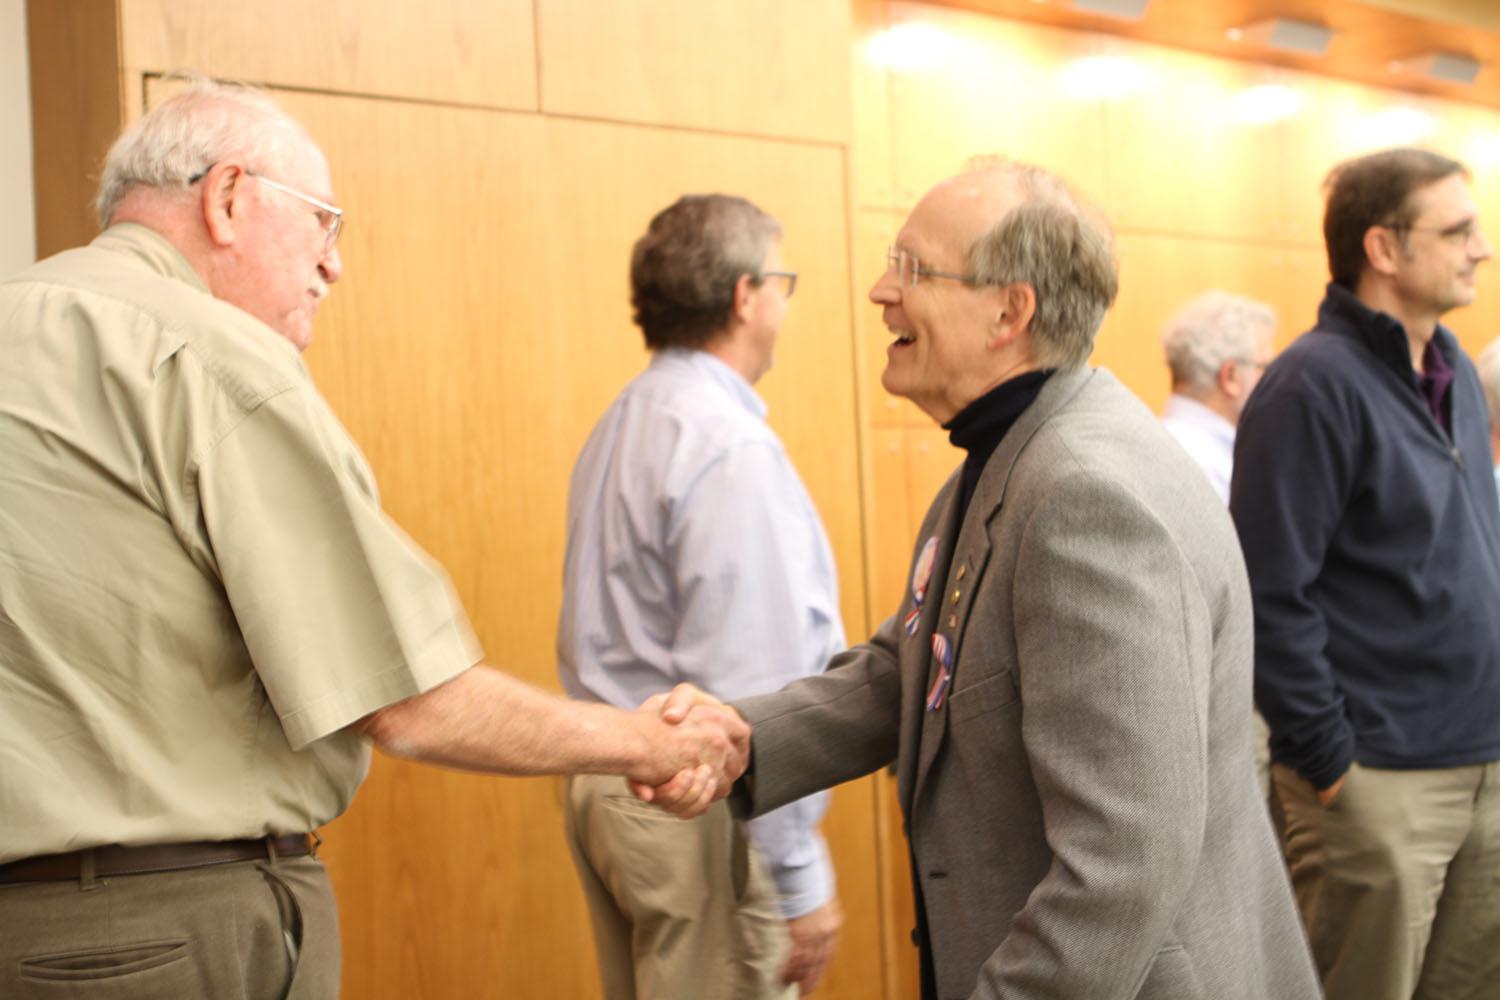 The+Mathematics+Department+held+in+reception+in+honor+of+Robert+Dorans+46+years+of+work+at+TCU.+